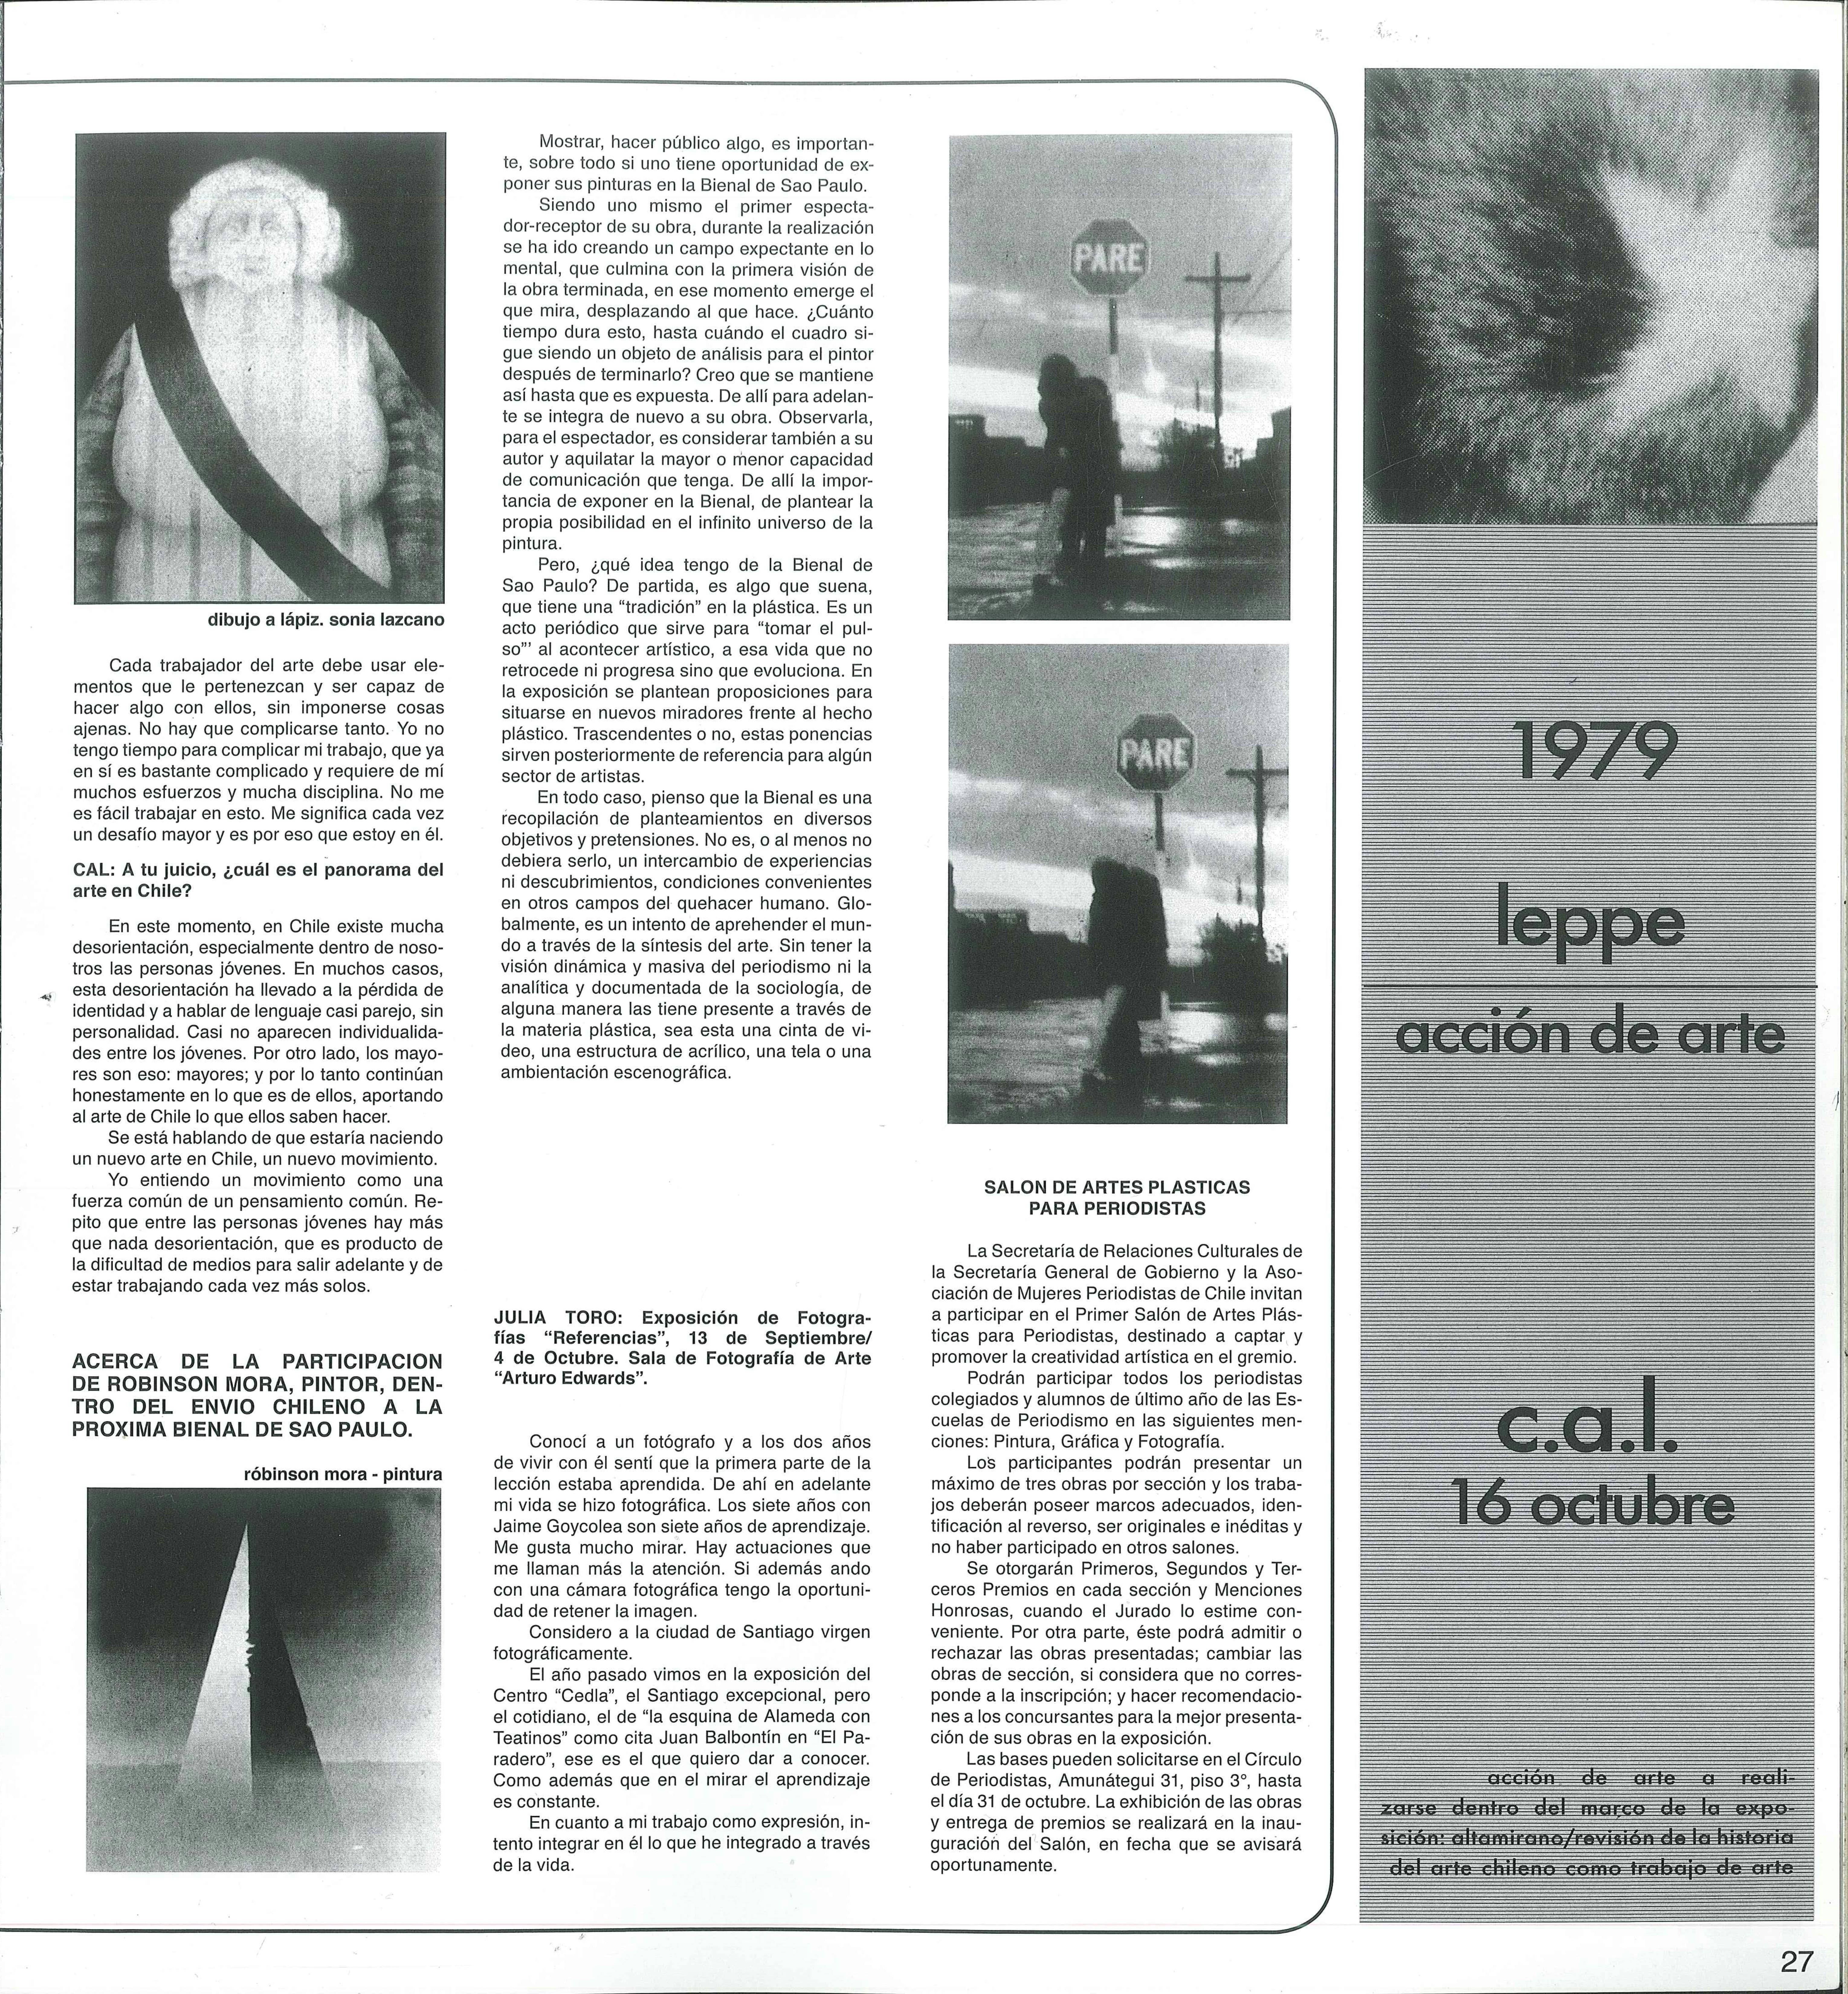 Two-page magazine spread